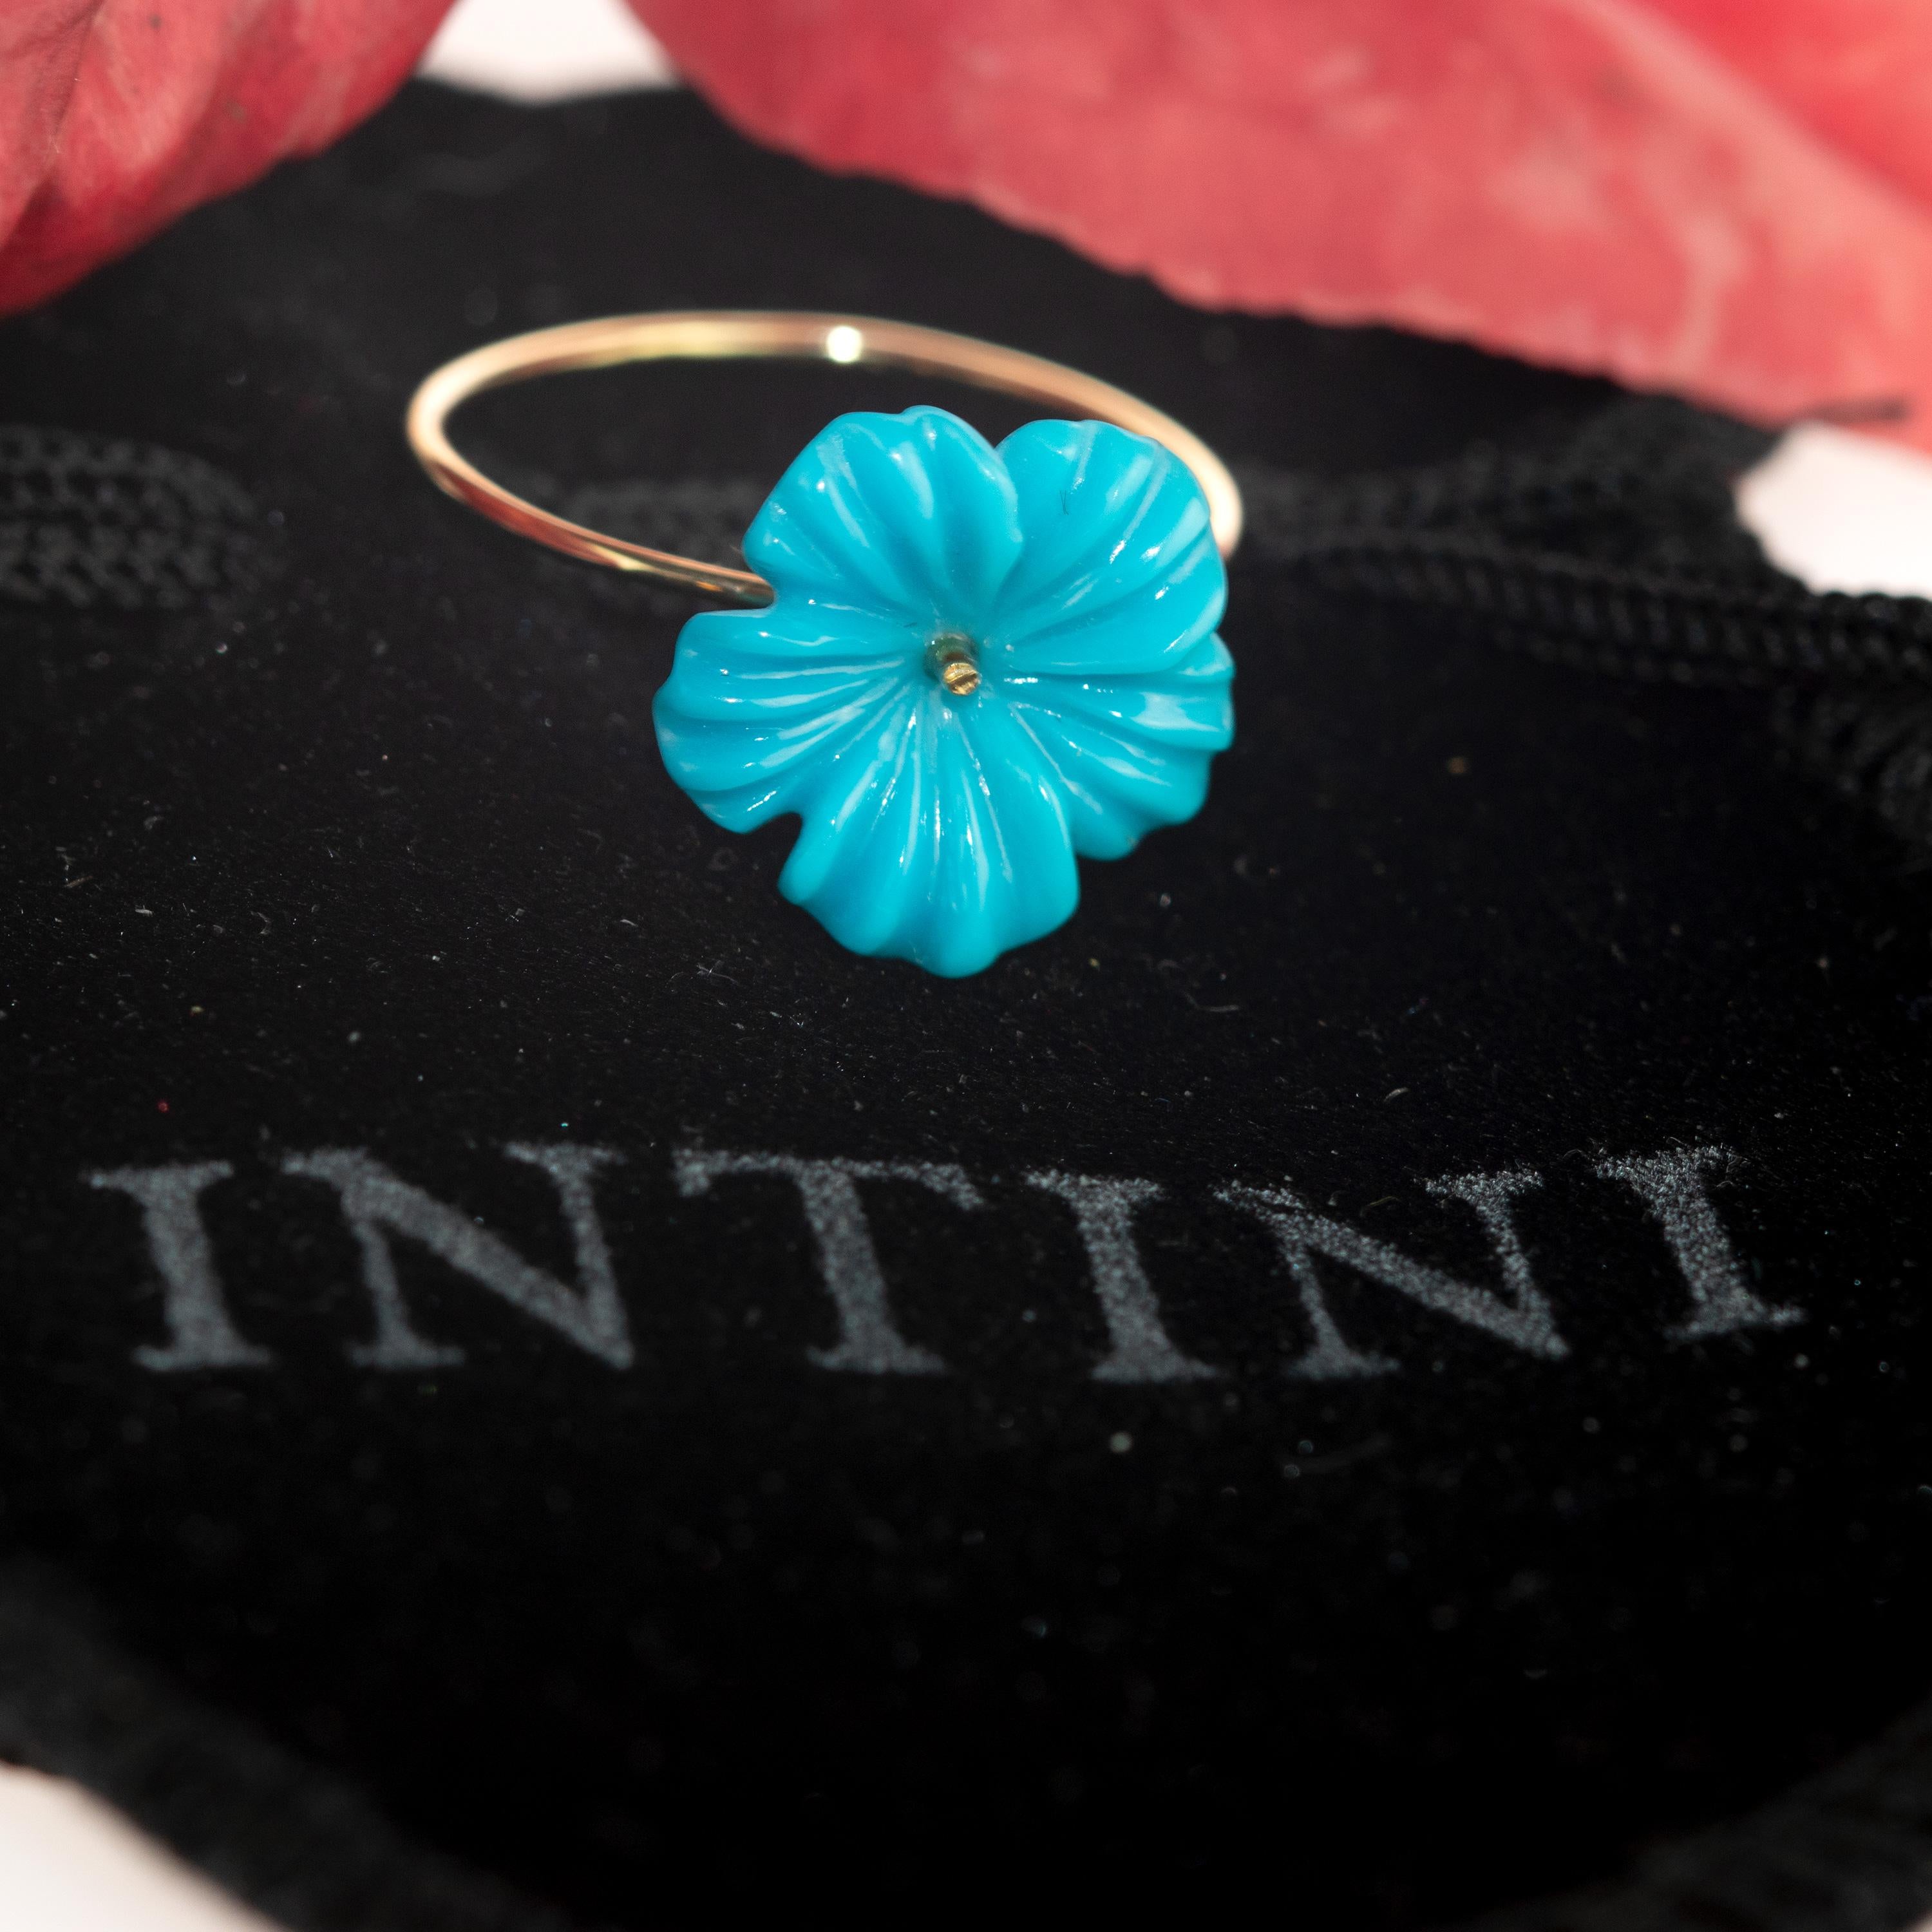 Astonishing natural turquoise flower ring, Carved petals that evoke the italian handmade traditional jewelry work. Girl delicate ring.

Beautiful and delicate design that evokes the roots of beauty that are gradually woven to achieve a harmonious